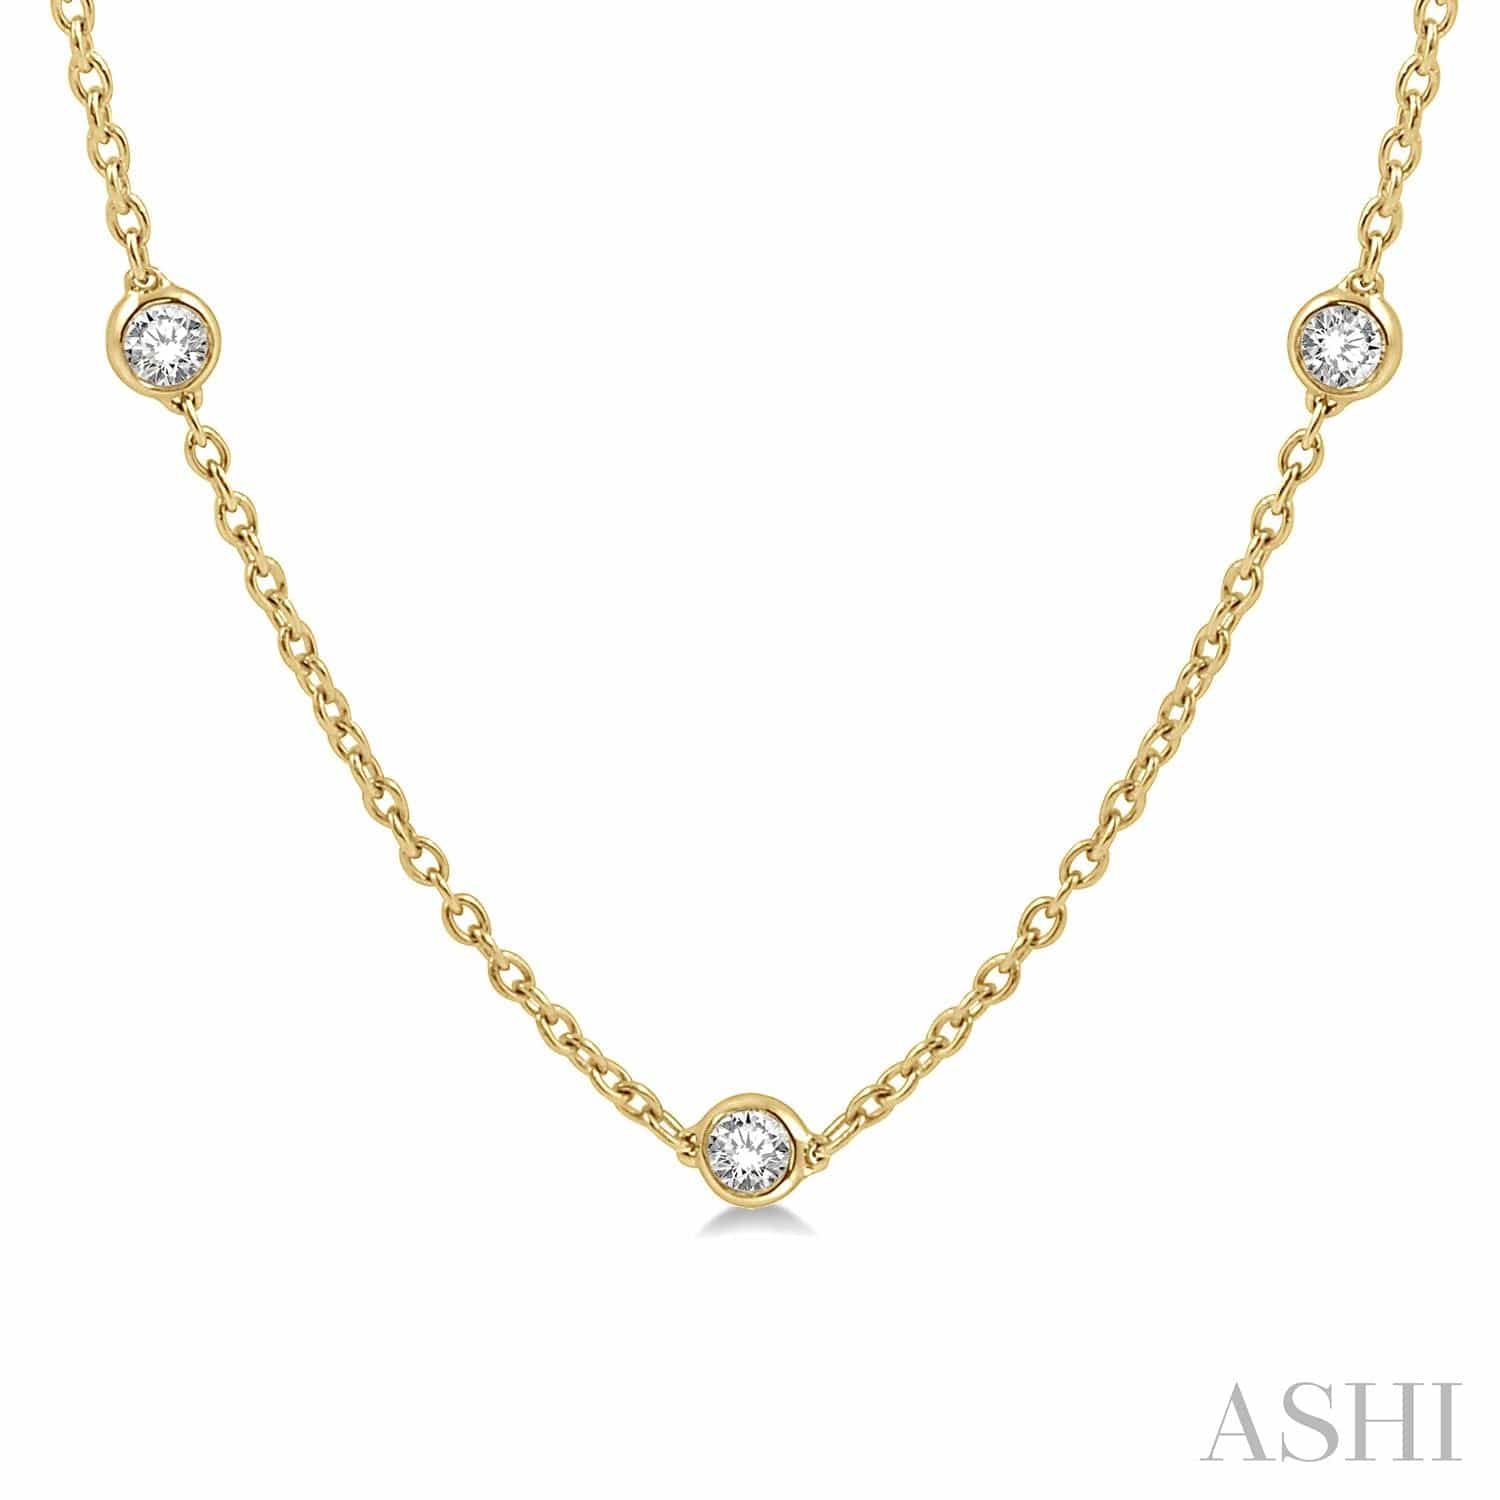 Diamond Station Necklace in 18k yellow and white gold, 1.40ctw | David  Gardner's Jewelers & Gemologists | Bryan-College Station, Texas